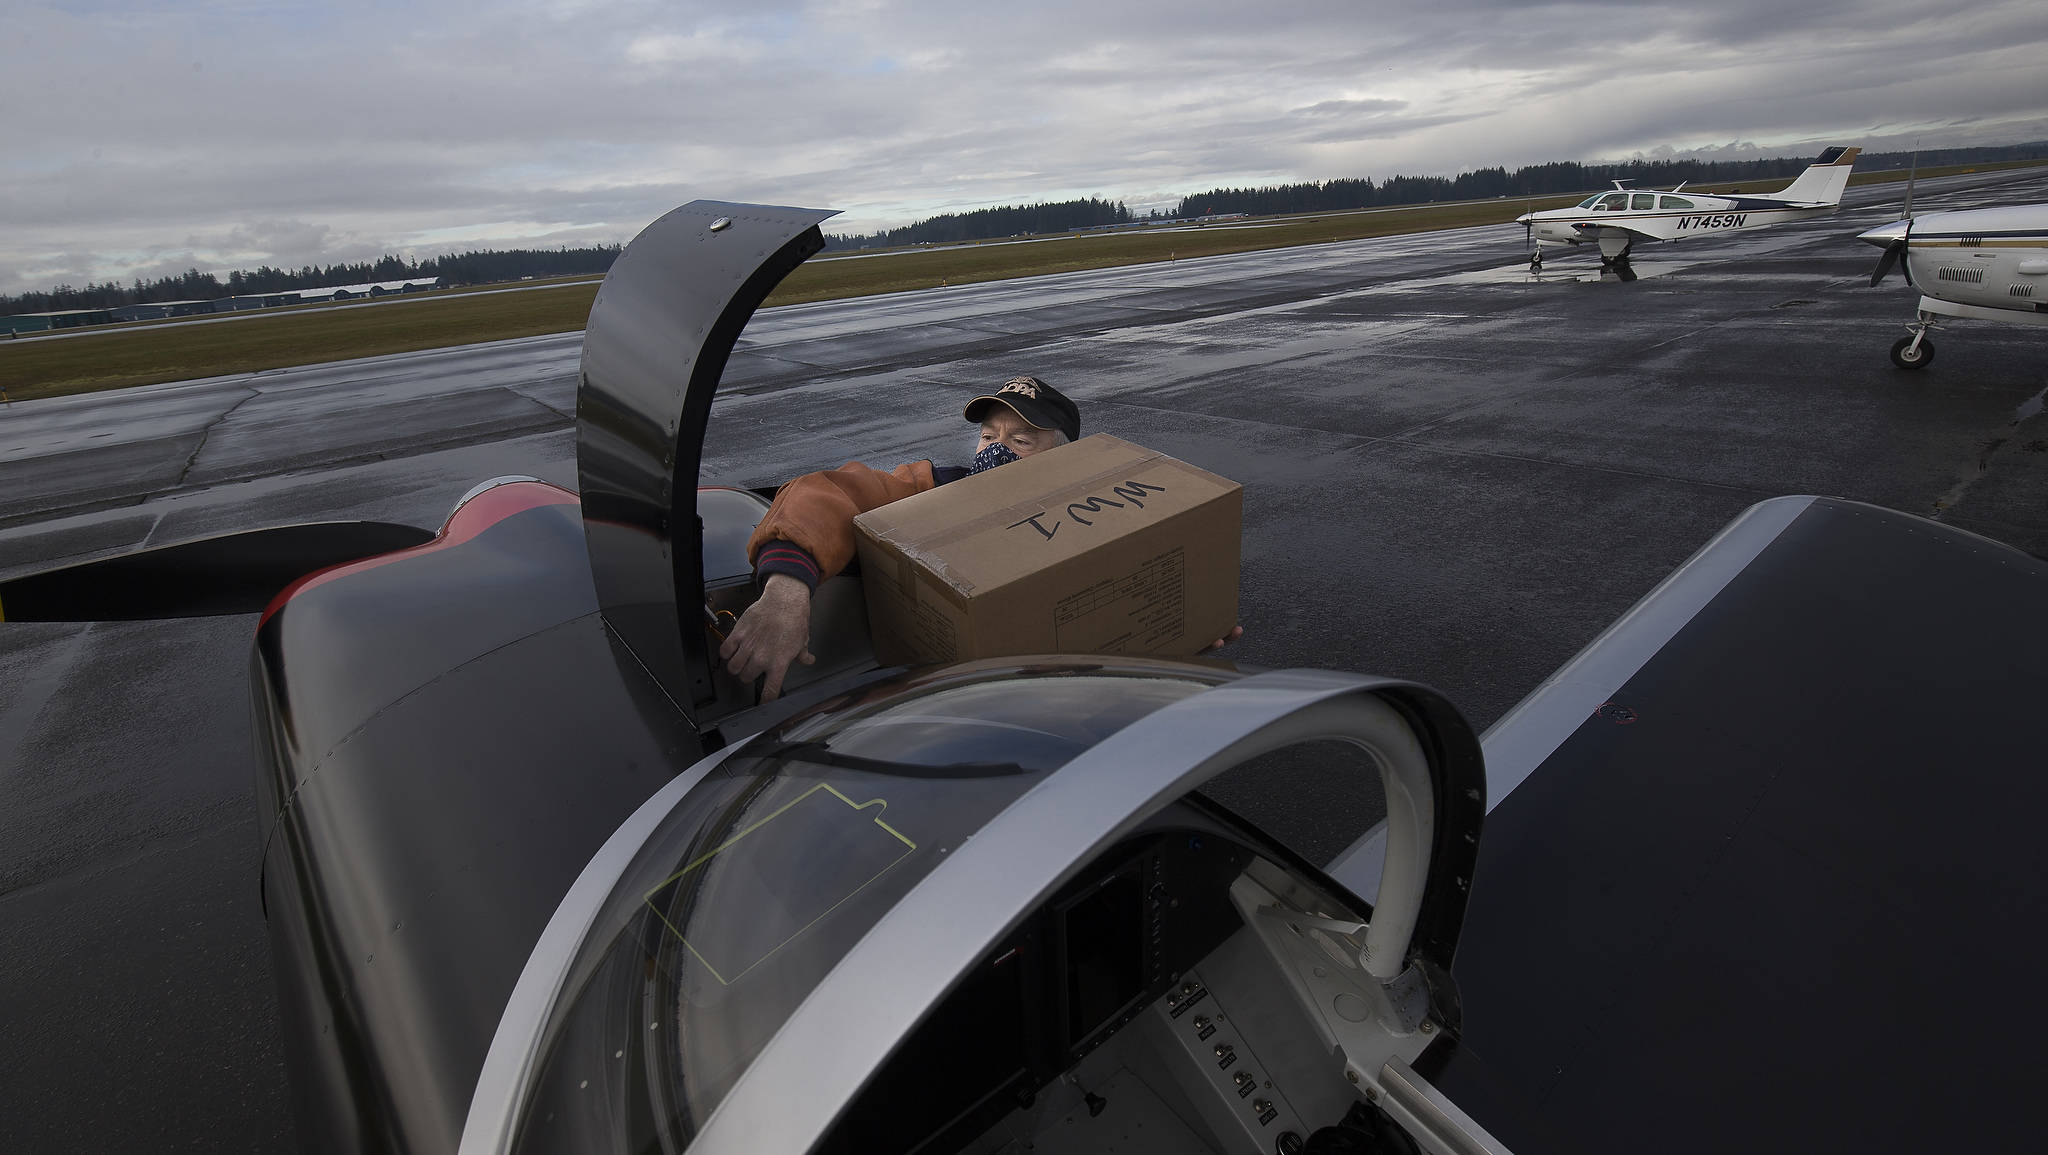 Ken Turpin struggles to fit a box of PPE into the front compartment of his RV-8 plane during an operation in which pilots delivered supplies to Native American tribes in Washington from Arlington Municipal Airport on Thursday. (Andy Bronson / The Herald)